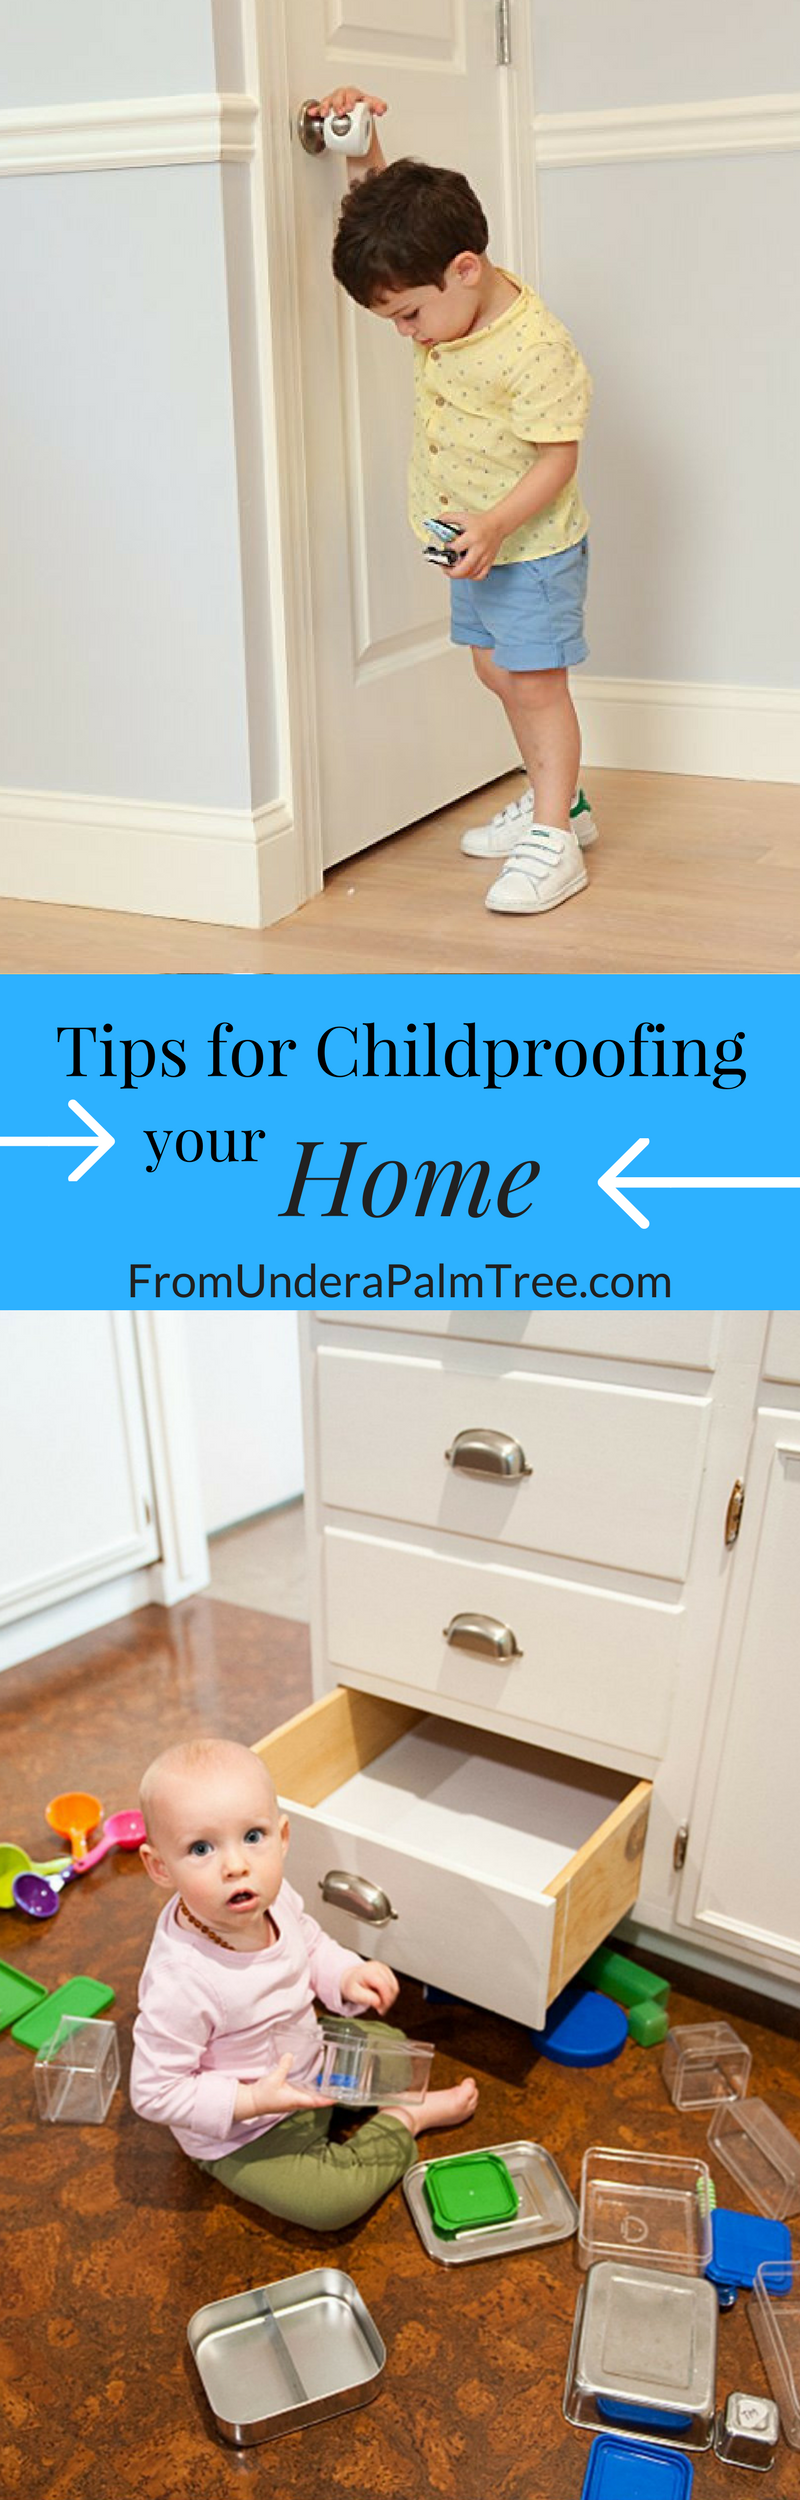 childproofing | tips for childproofing | baby proofing | tips for baby proofing | baby proof | childproof | safety | kids safety | how to keep your kids safe at home | childproofing your home | childproofing tips | childproofing your kitchen | childproofing your kids room | anchoring furniture | how to baby proof your home | how to baby proof | how to childproof | how to anchor furniture | magnetic door locks for cabinets | 